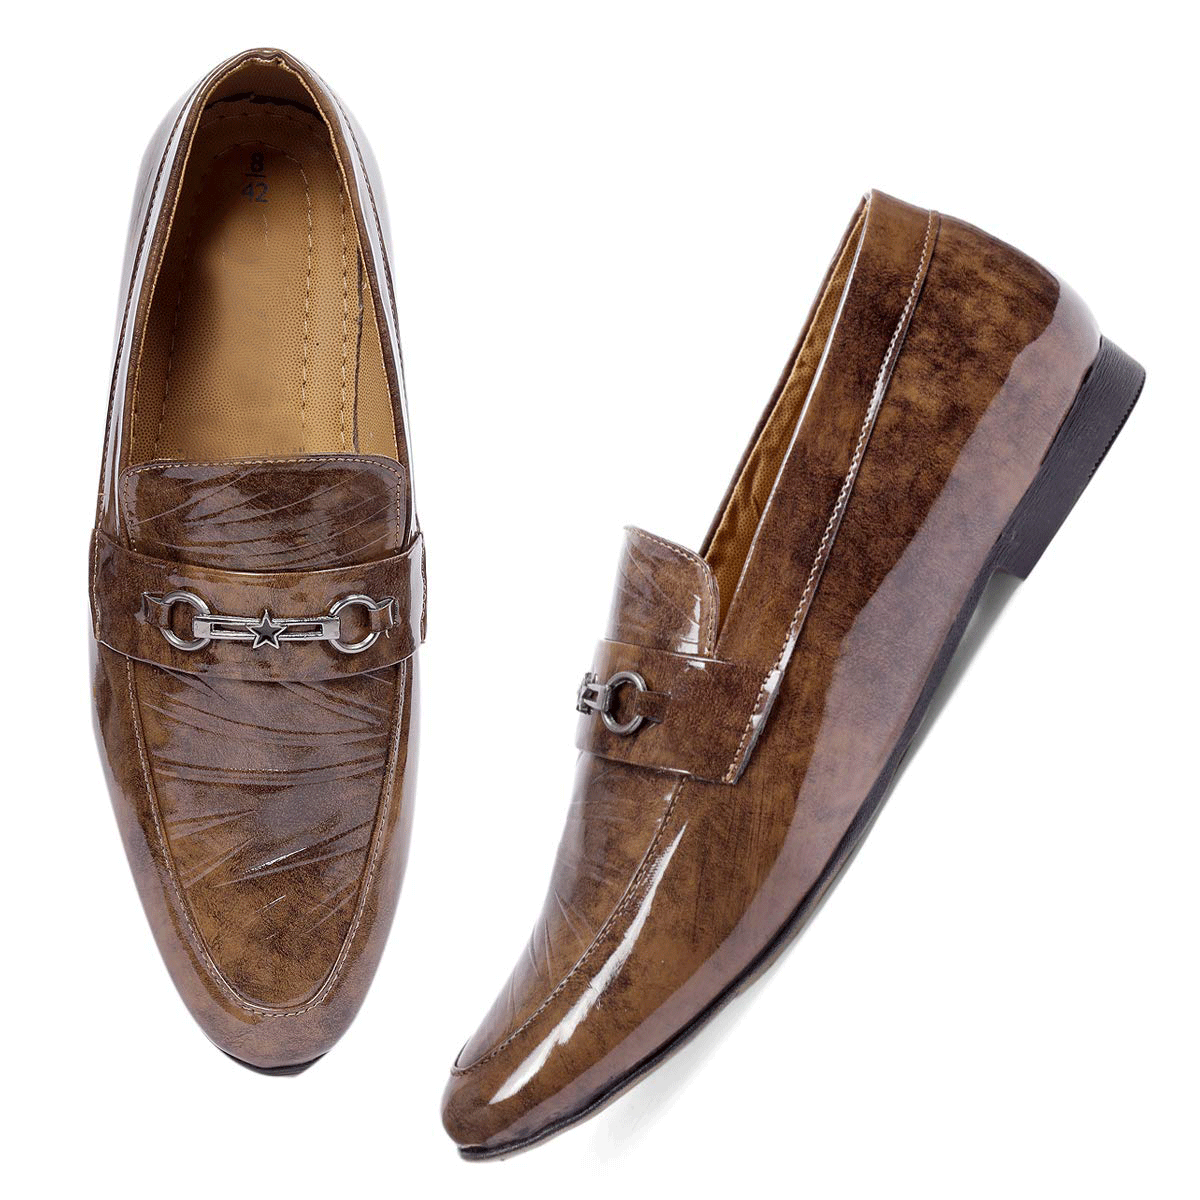 Stylish Pattern Pu Leather Loafer & Moccasins Shoes For Men's-Unique and Classy